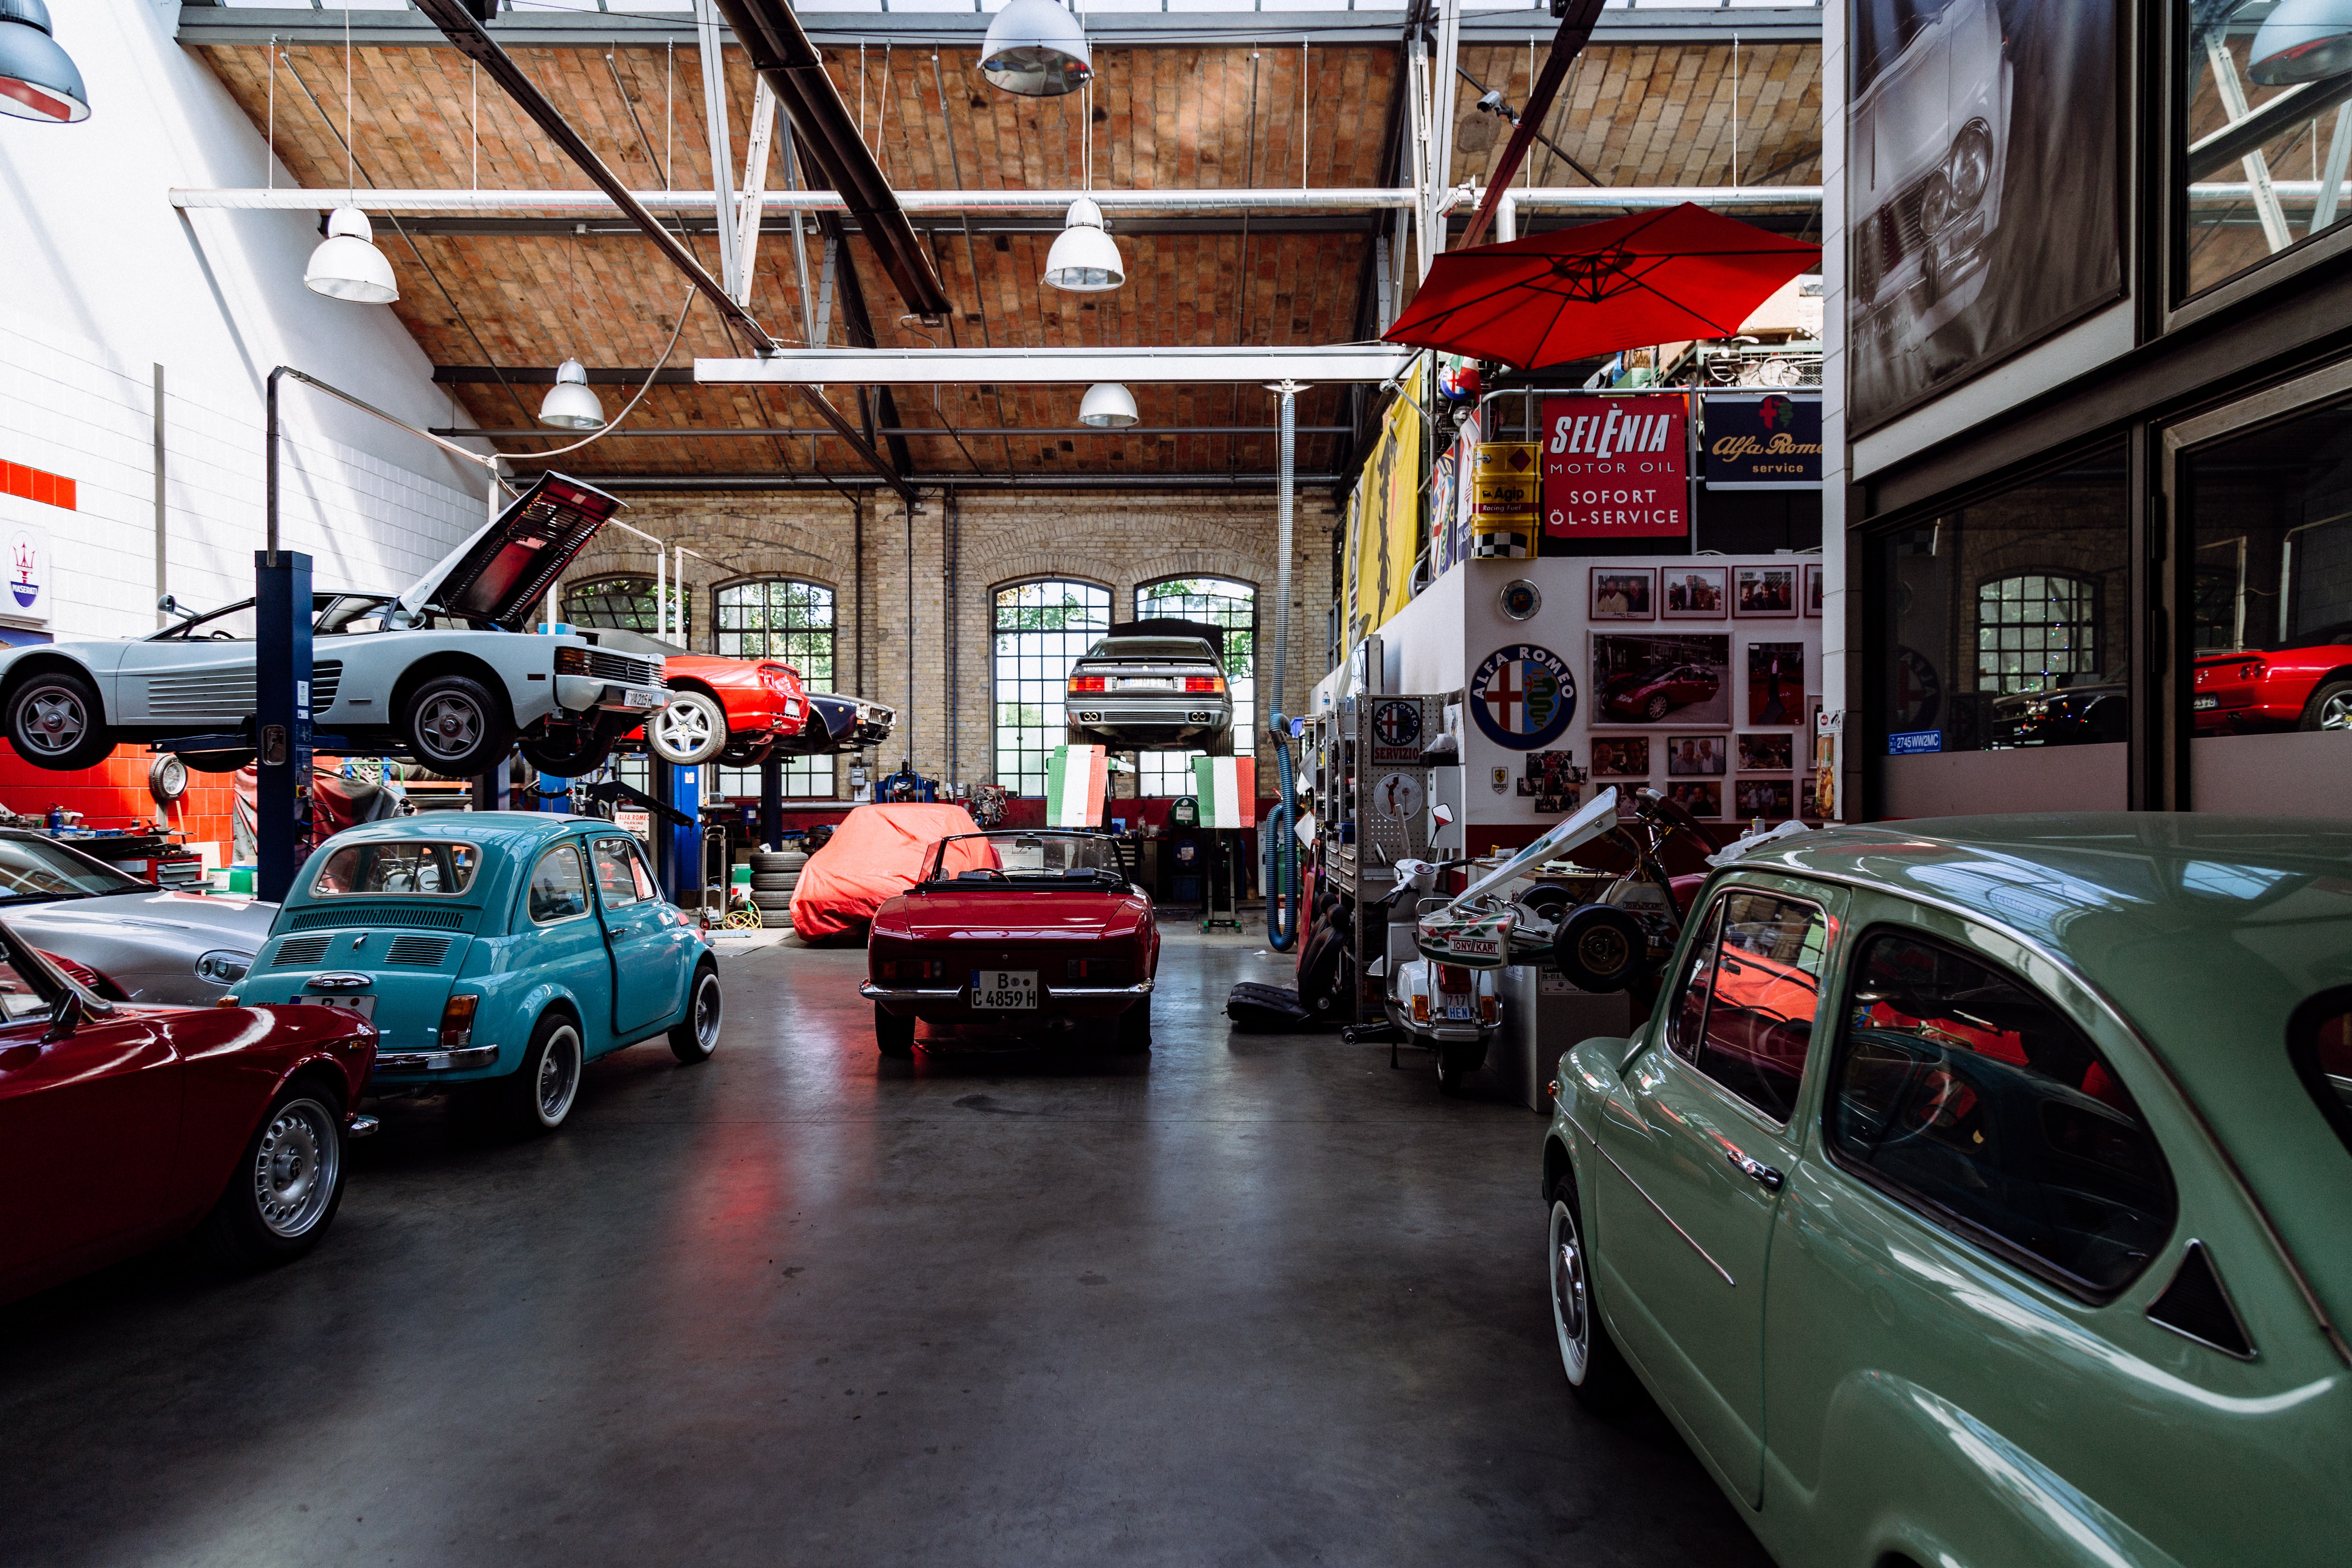 cool Cars in a garage